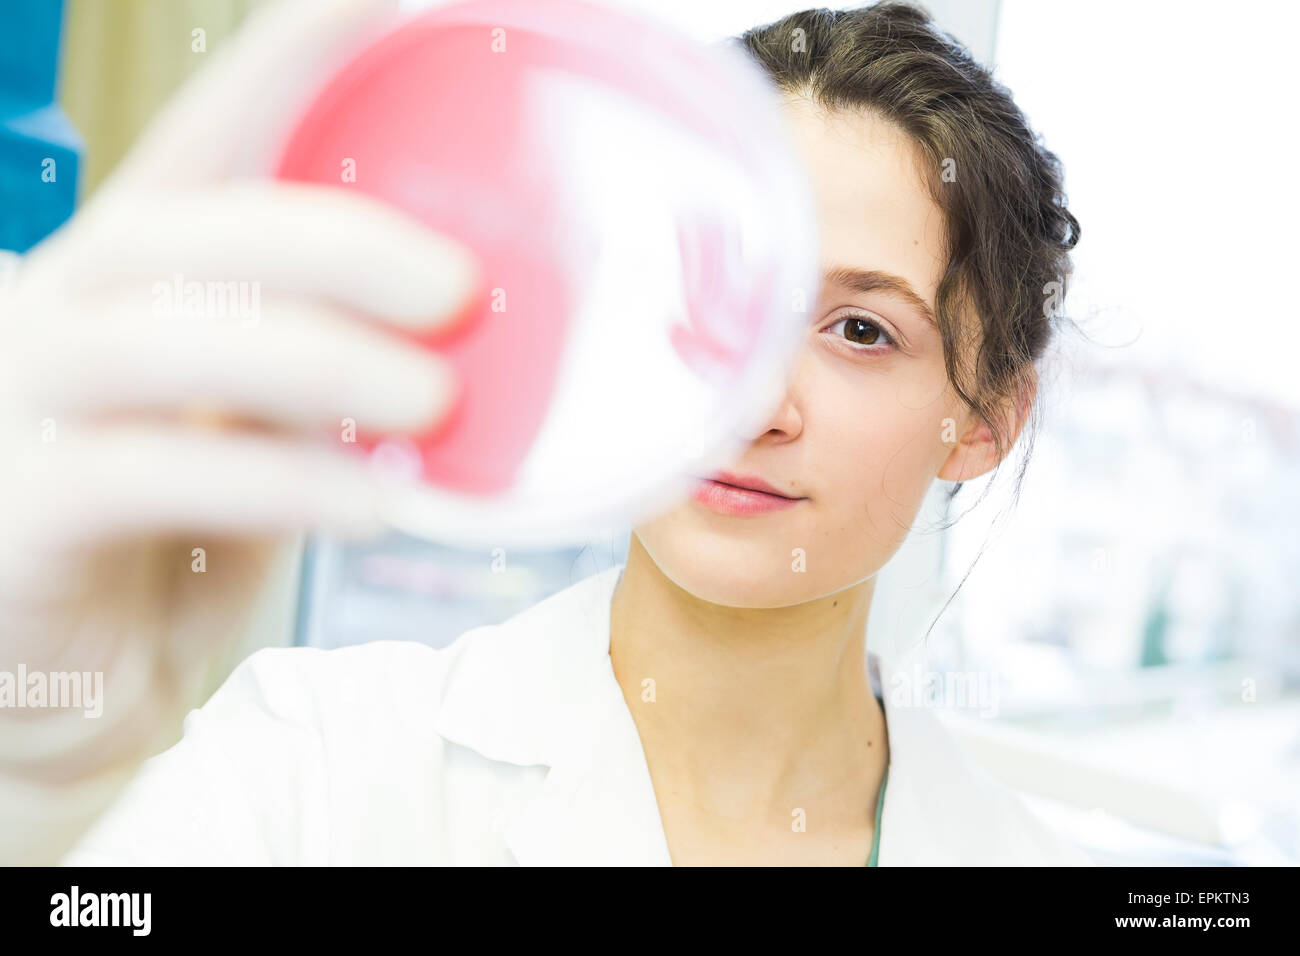 Young lab technician looking at agar plate Stock Photo